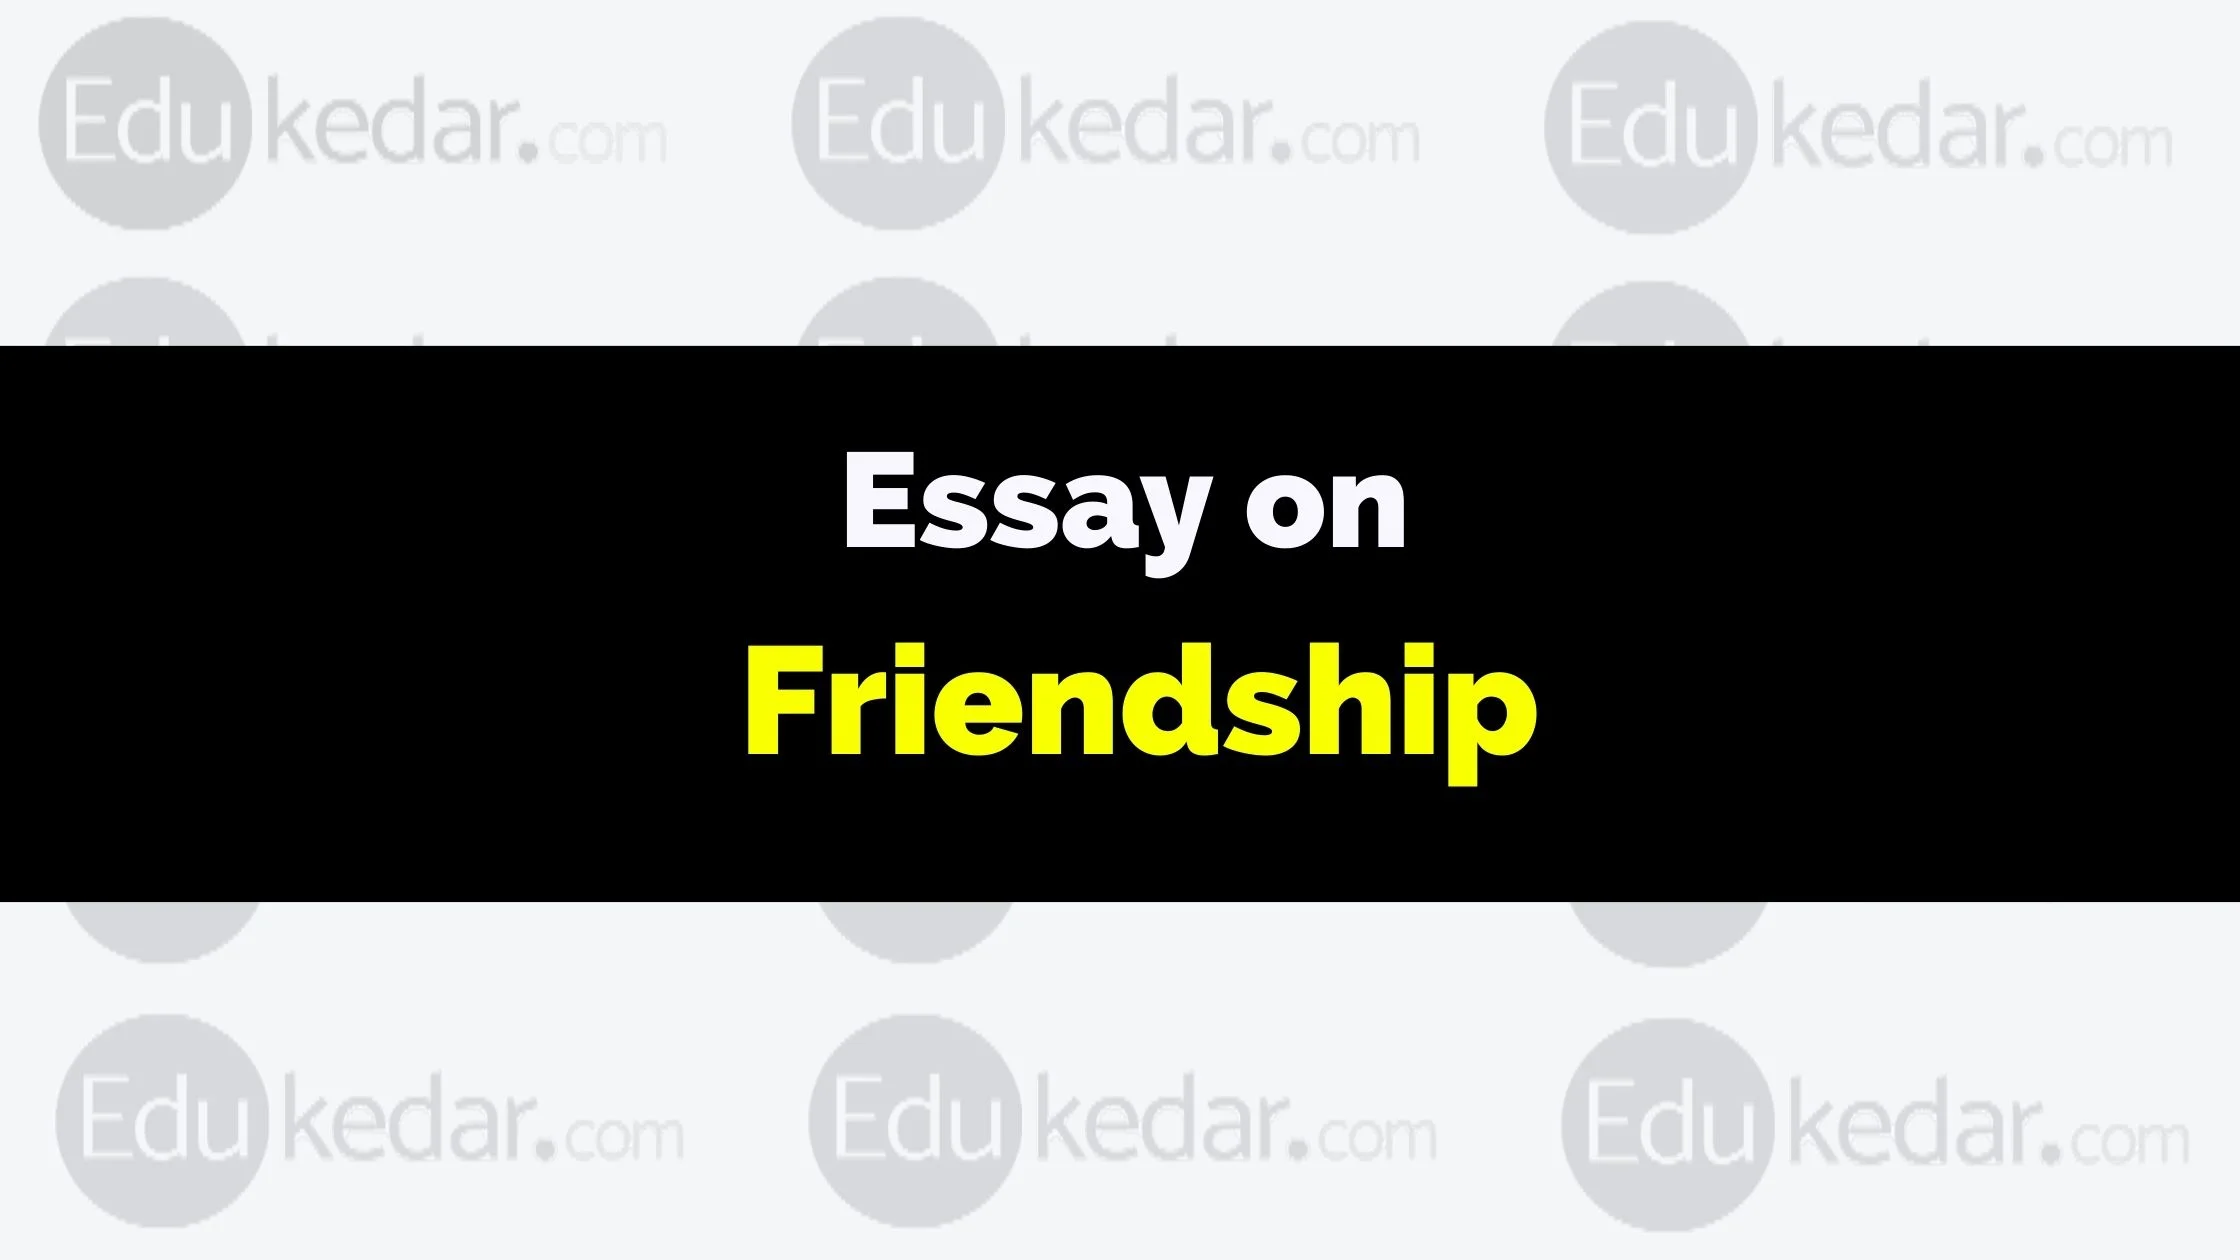 write an essay of about 150 words on friendship